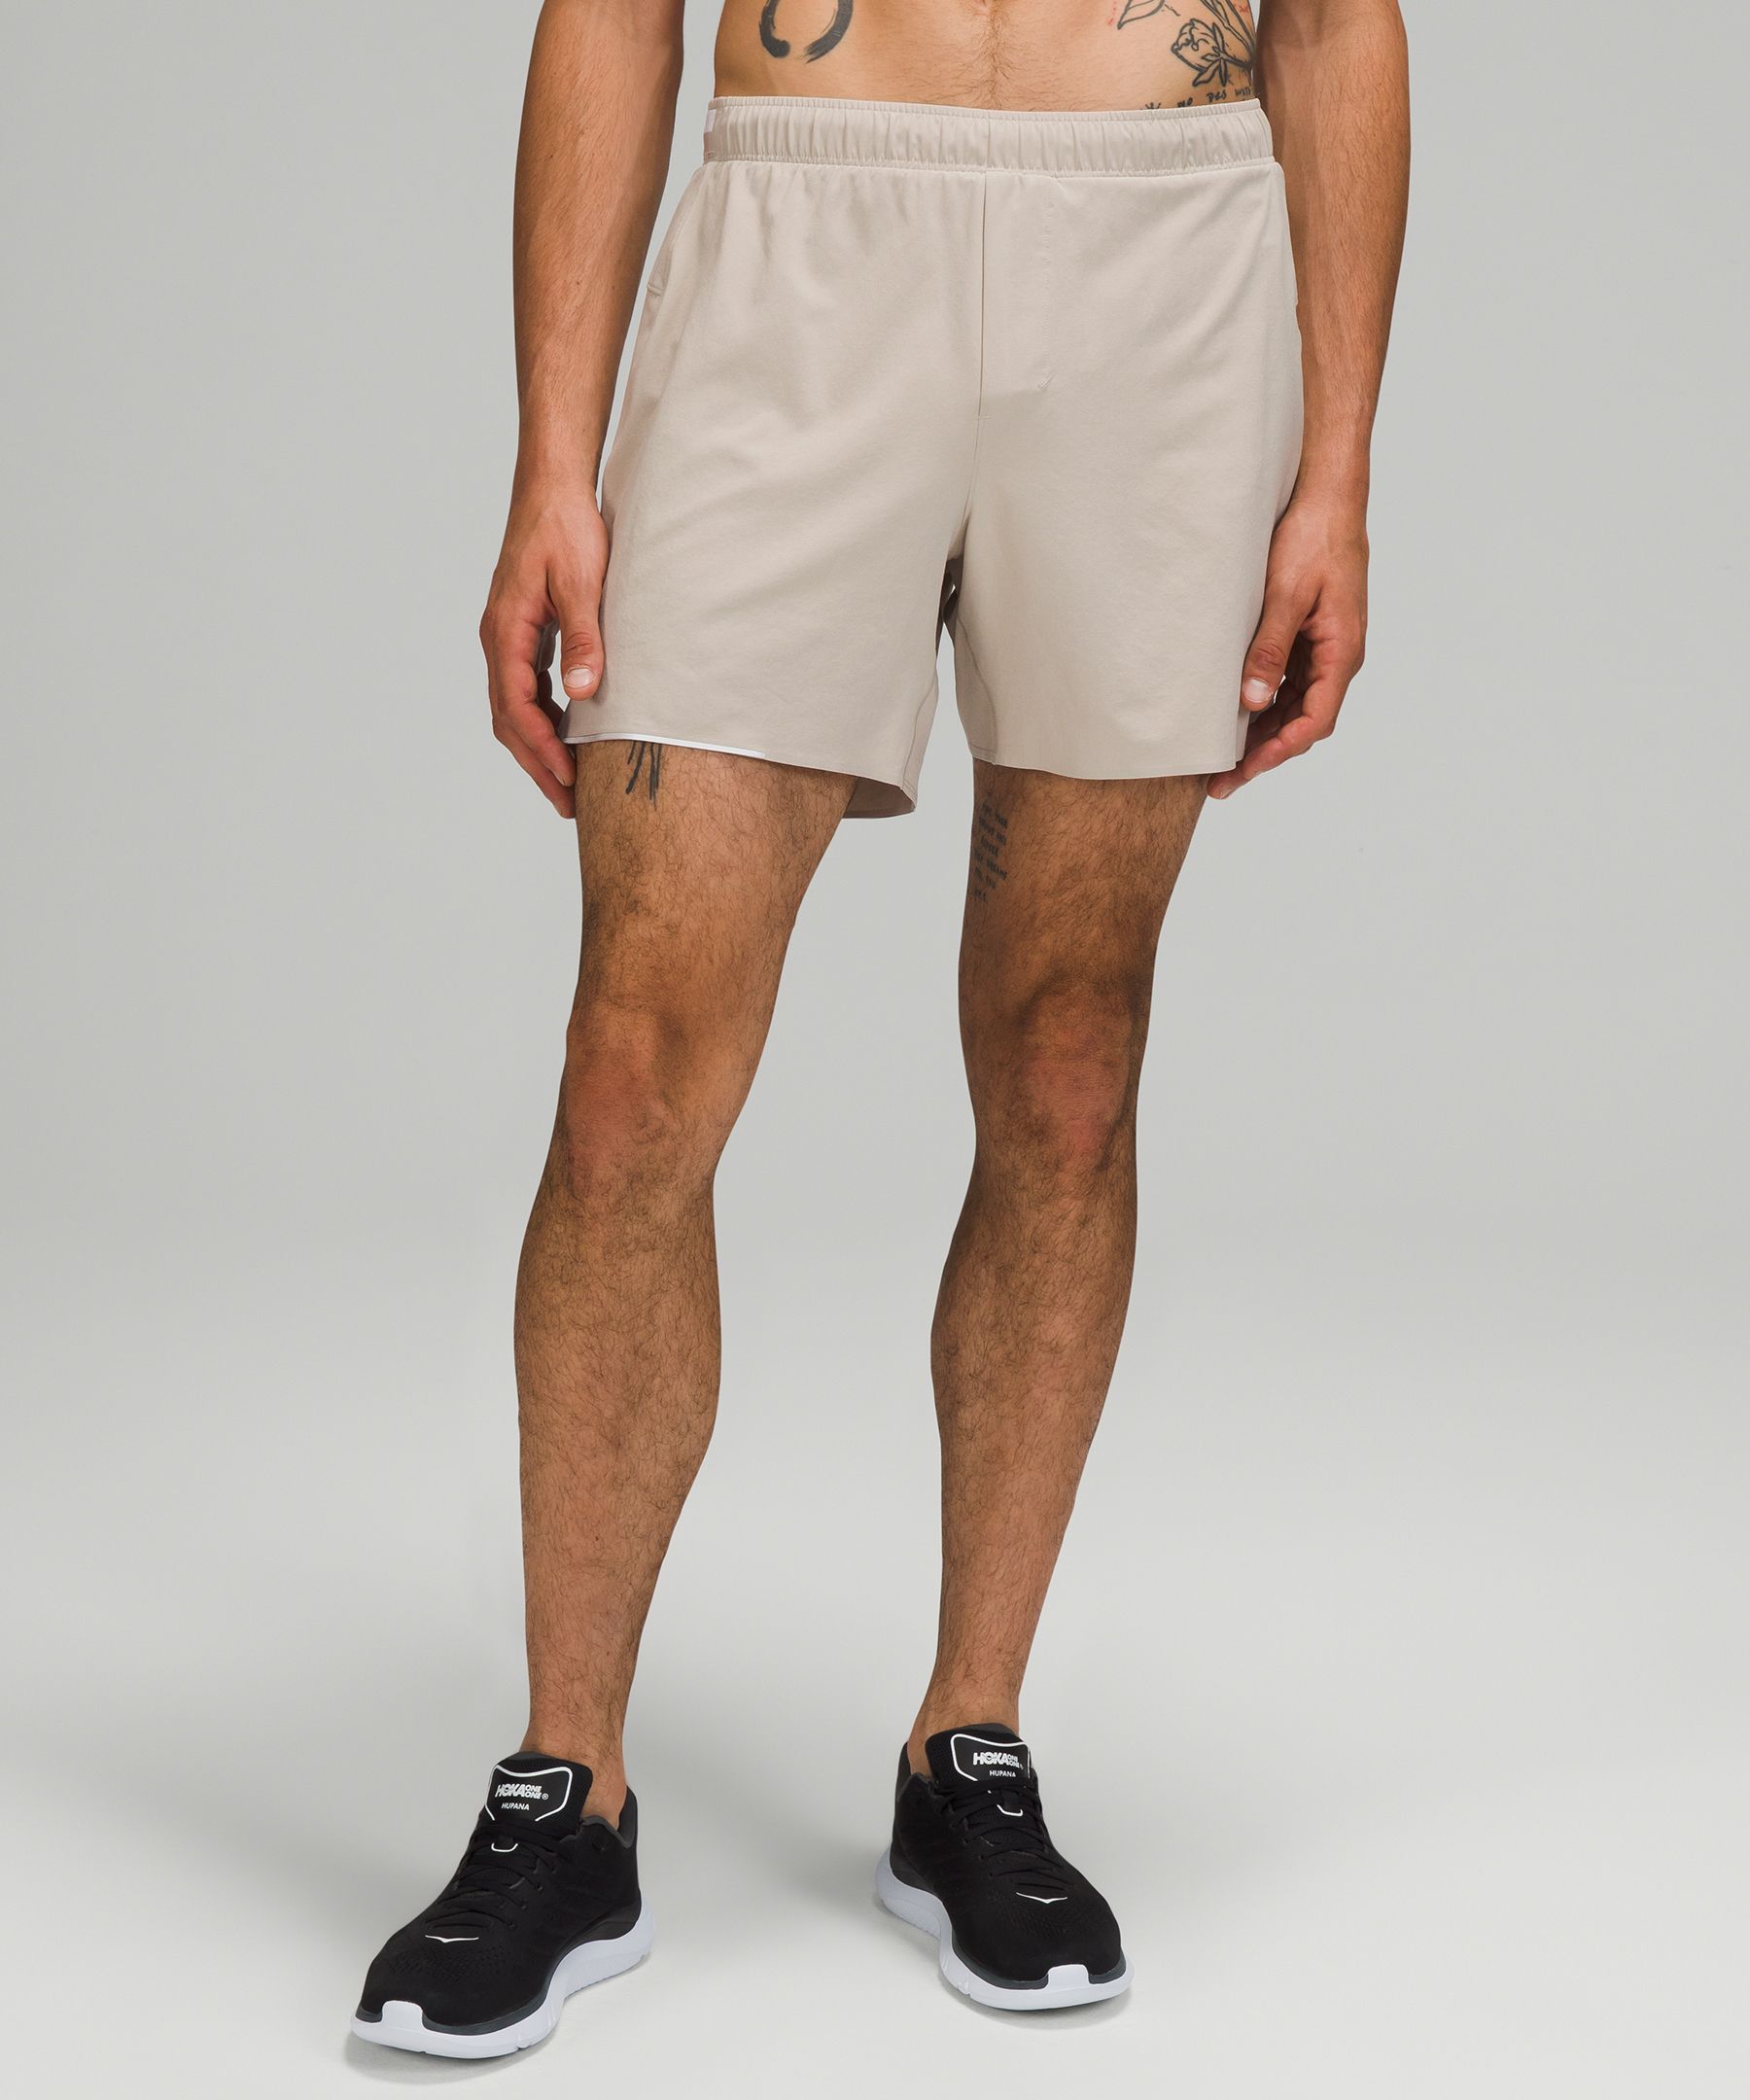 Lululemon Surge Lined Shorts 6" In Raw Linen